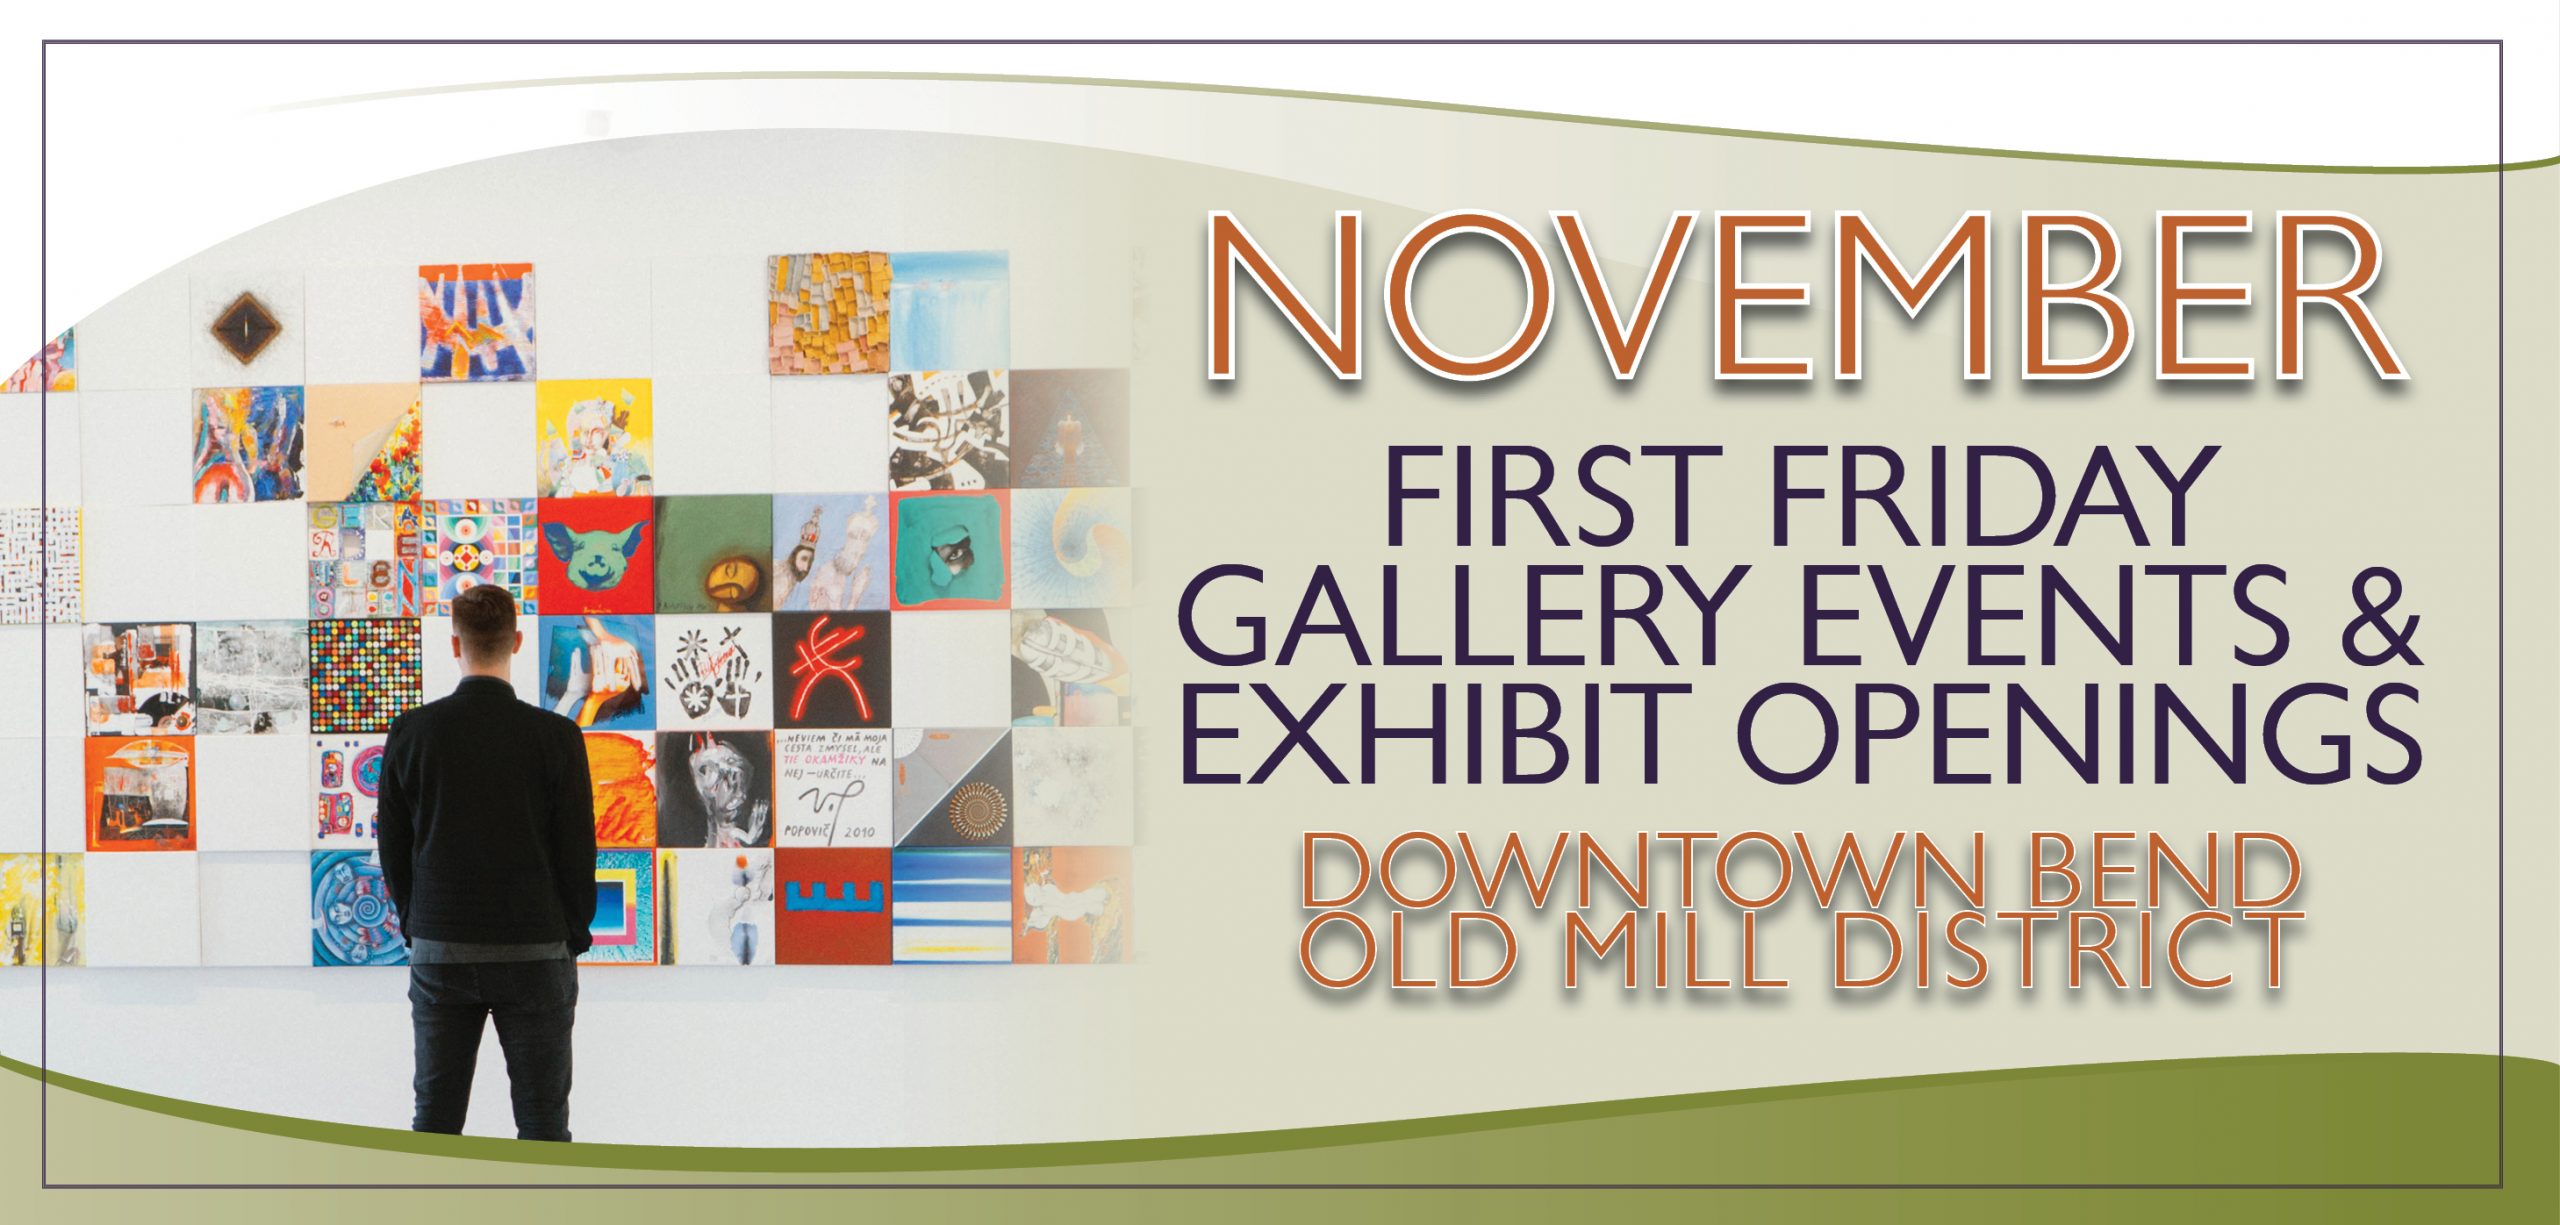 November First Friday Gallery Events & Exhibit Openings in Bend